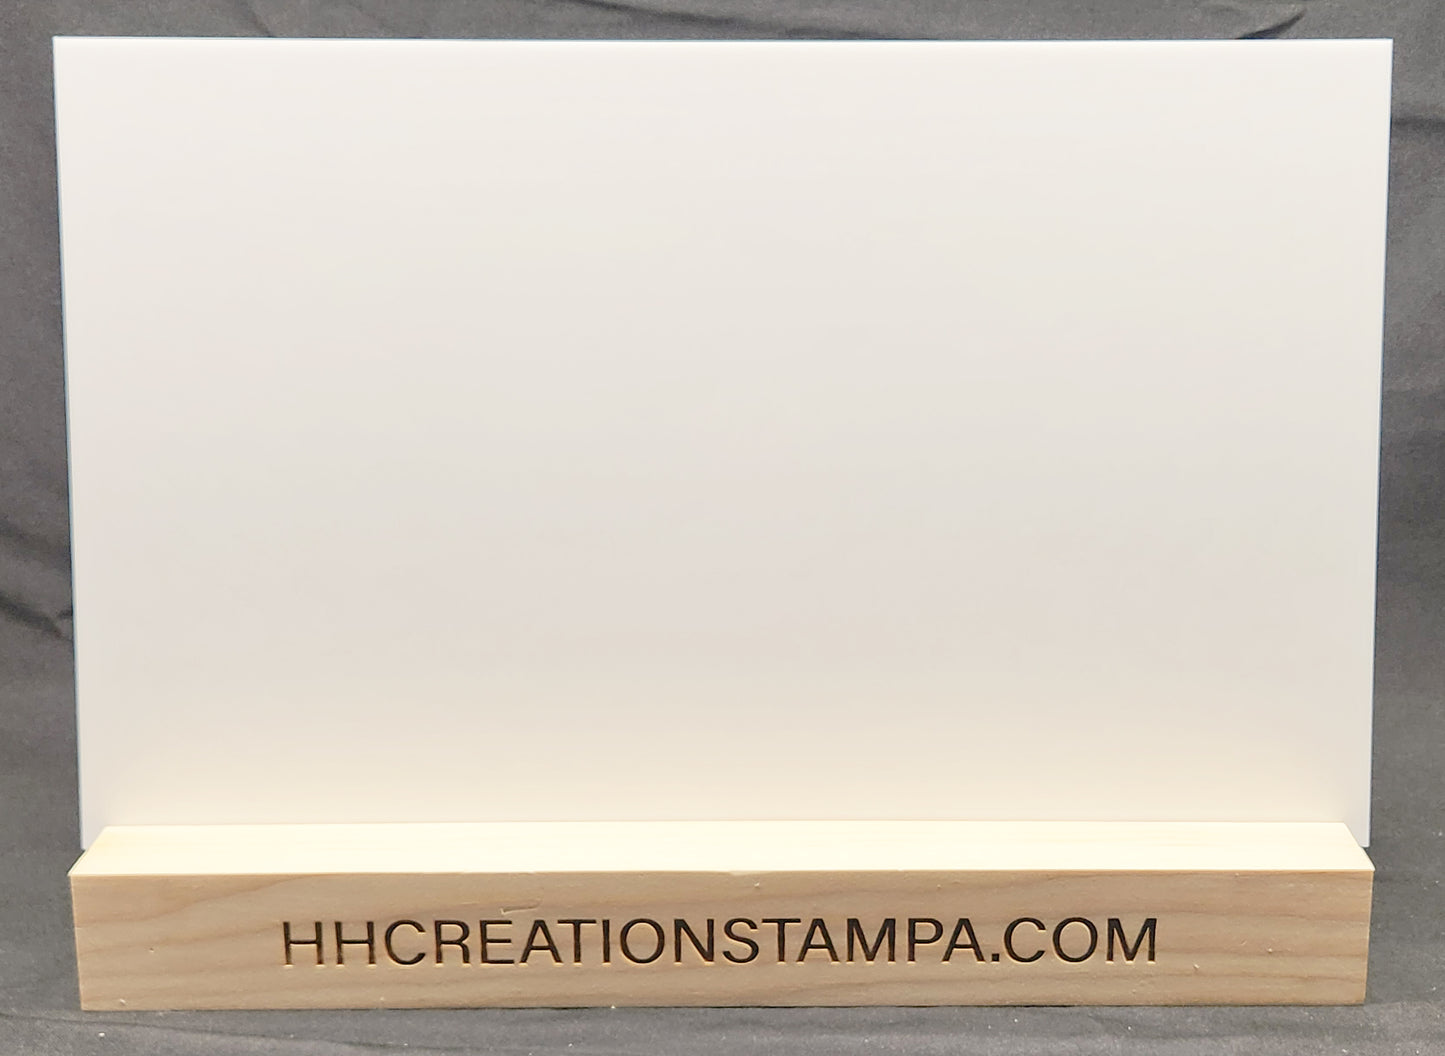 1/8" White Cast Acrylic Sheets - Glossy on Both Sides - 11.75" x 19"